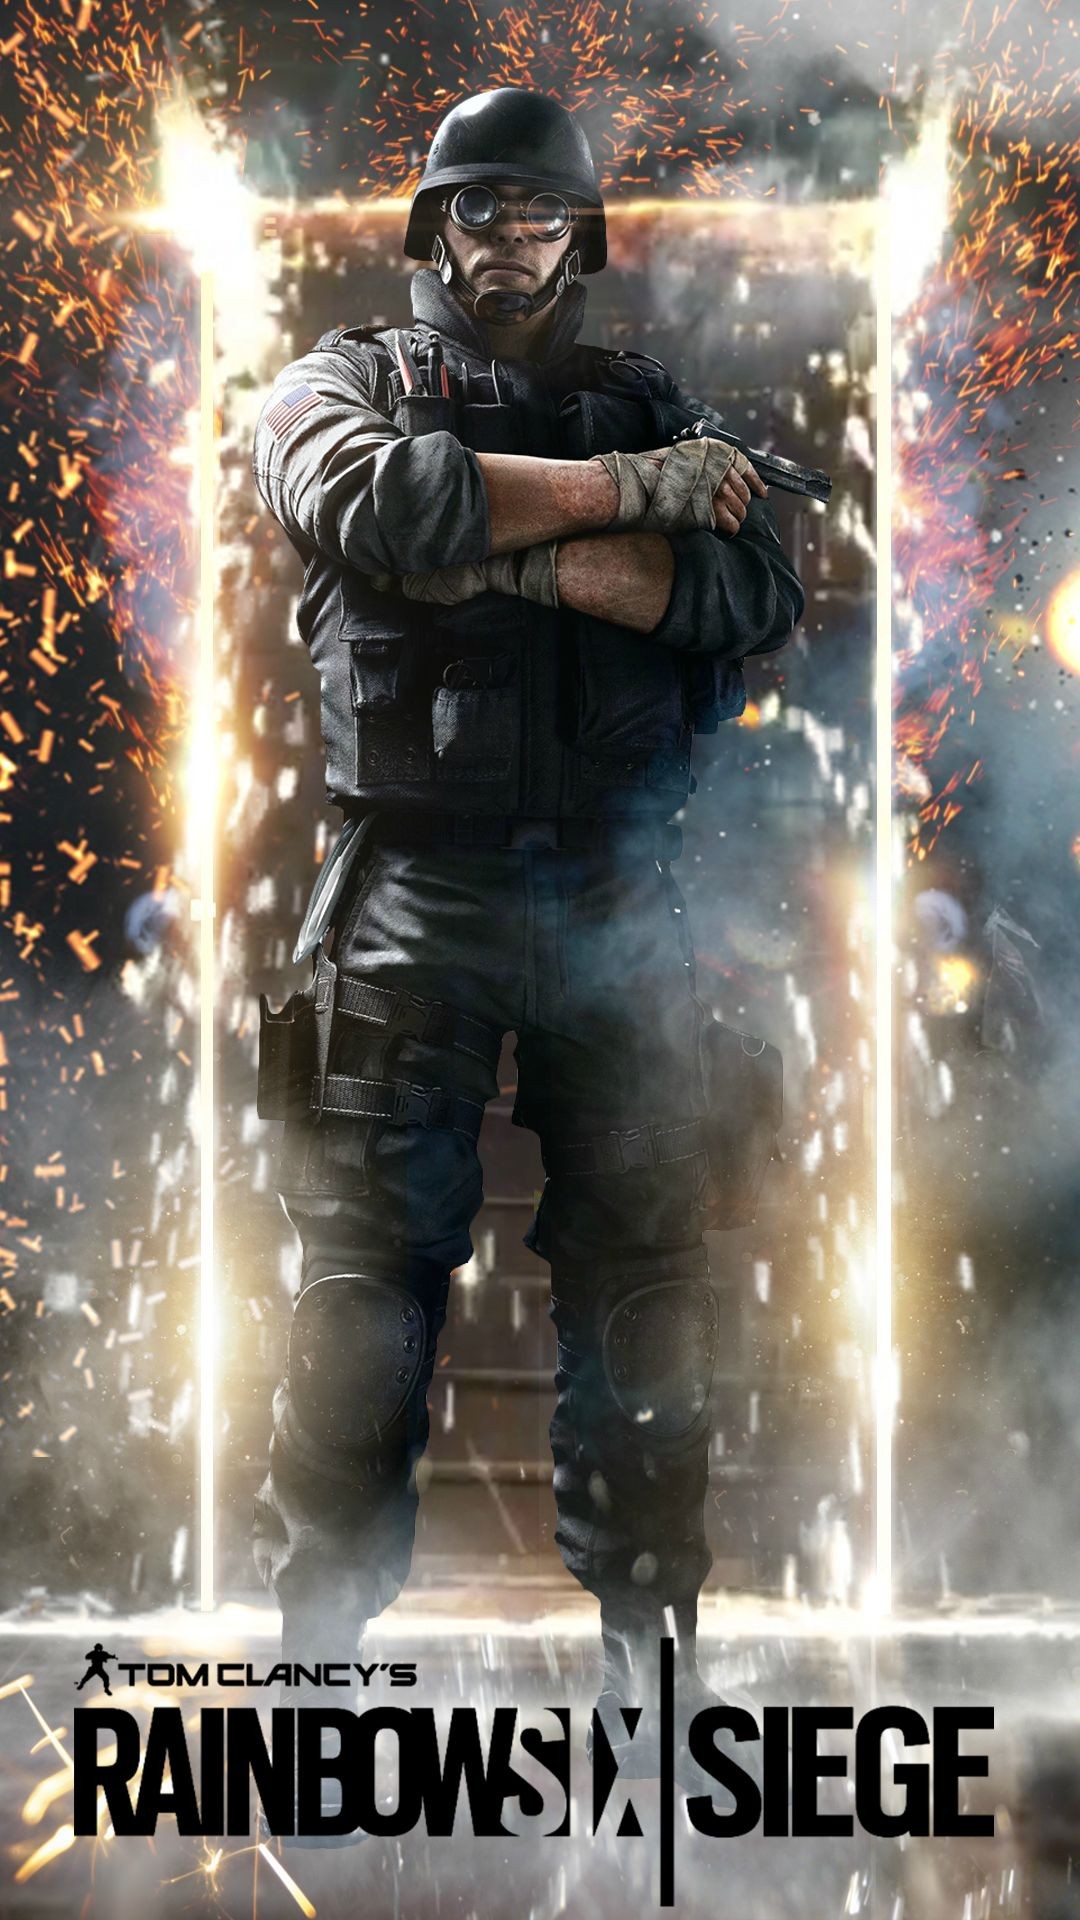 rainbow six siege android wallpapers wallpaper cave on rainbow six siege android wallpapers